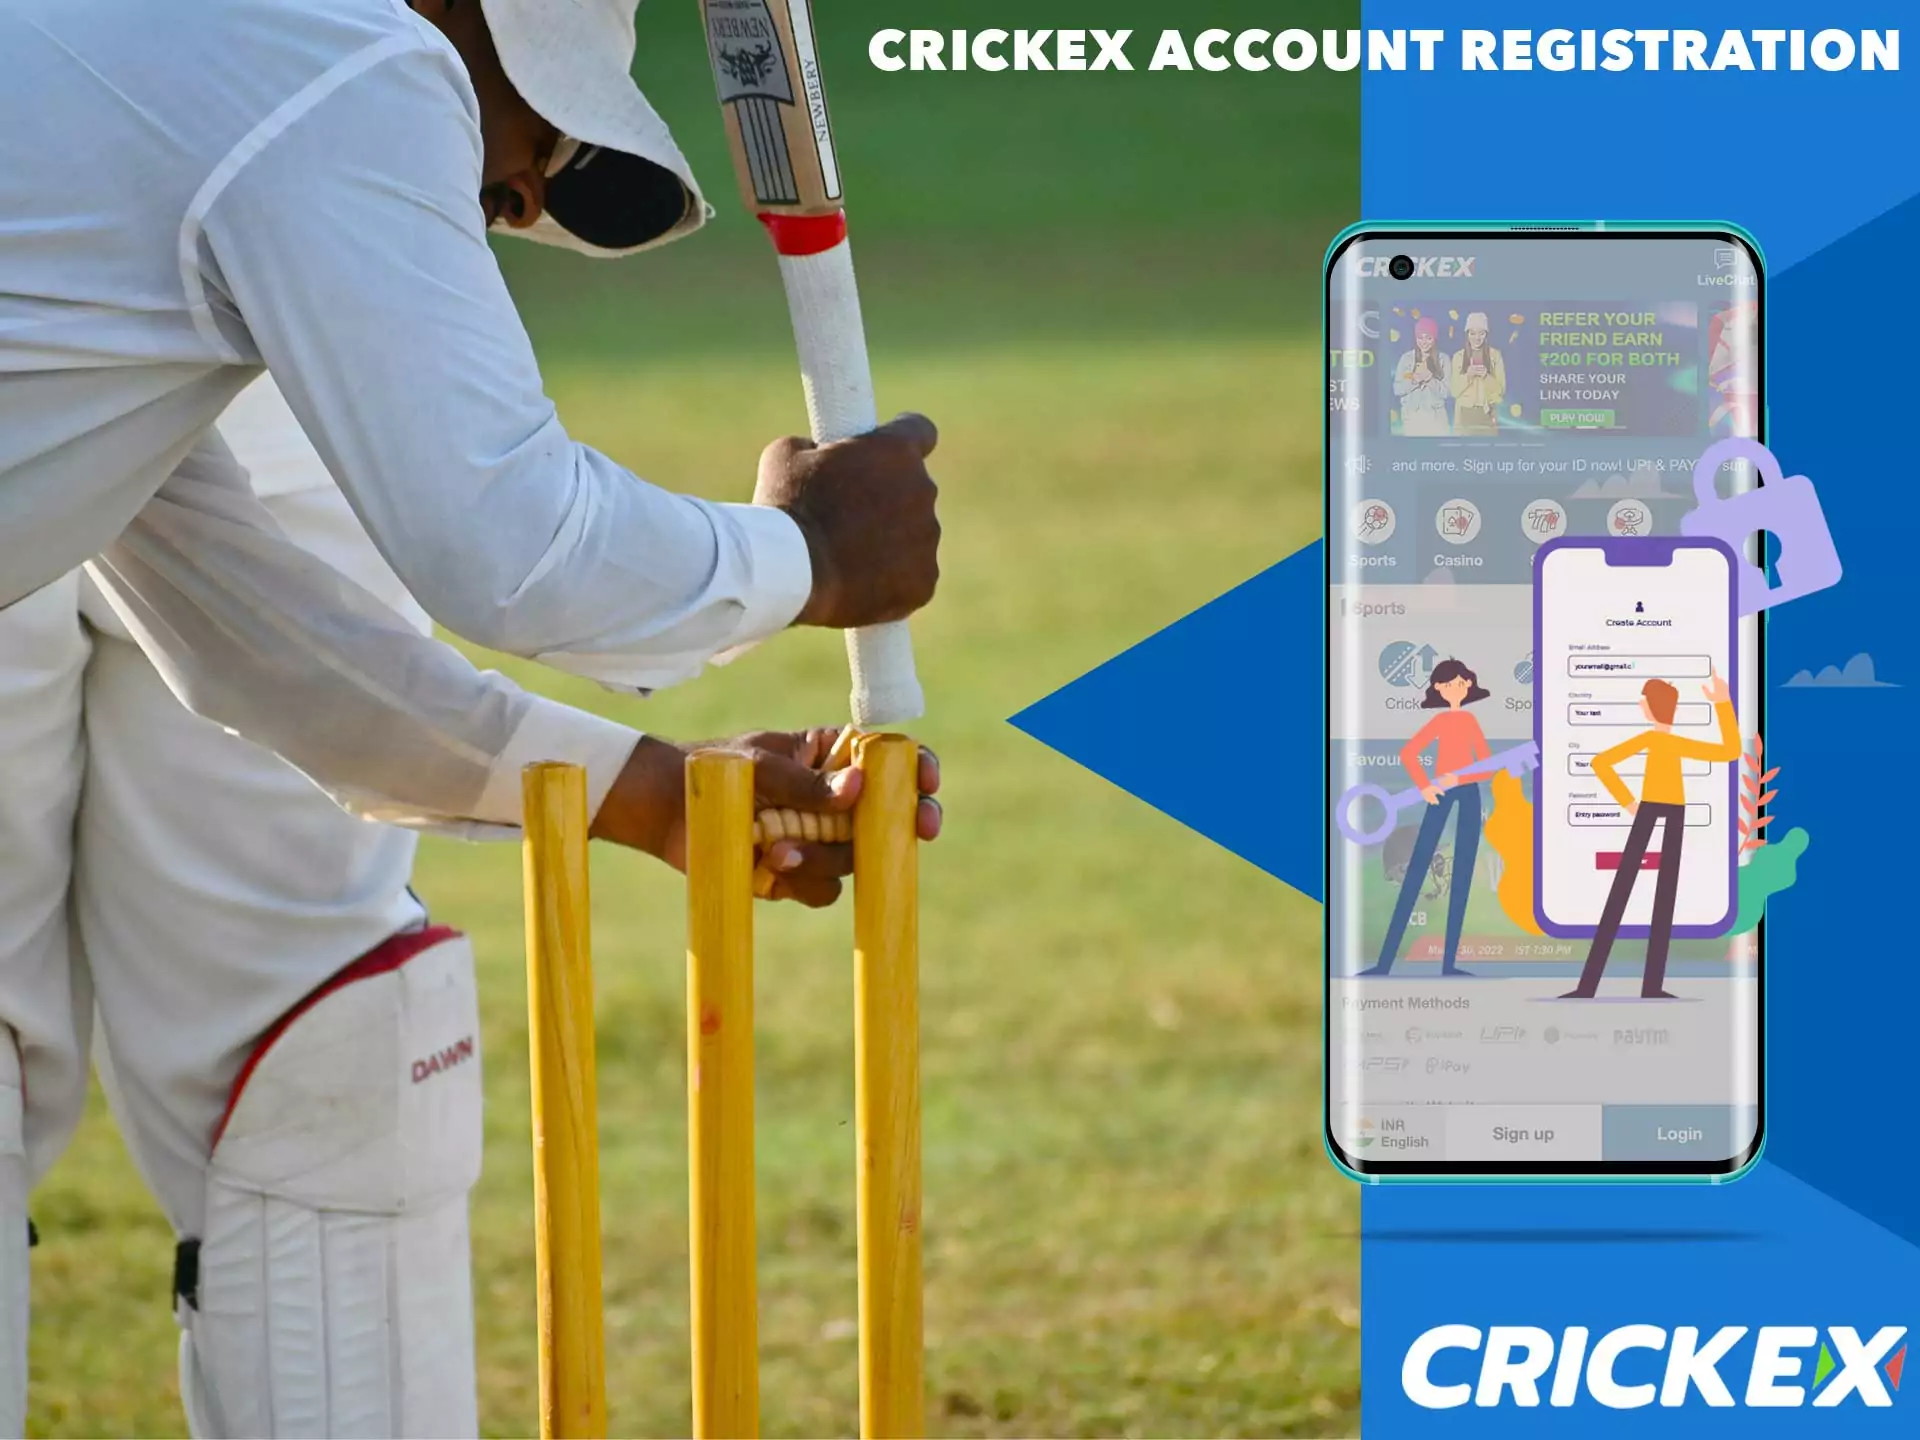 Signing up for a Crickex account takes 5 minutes.